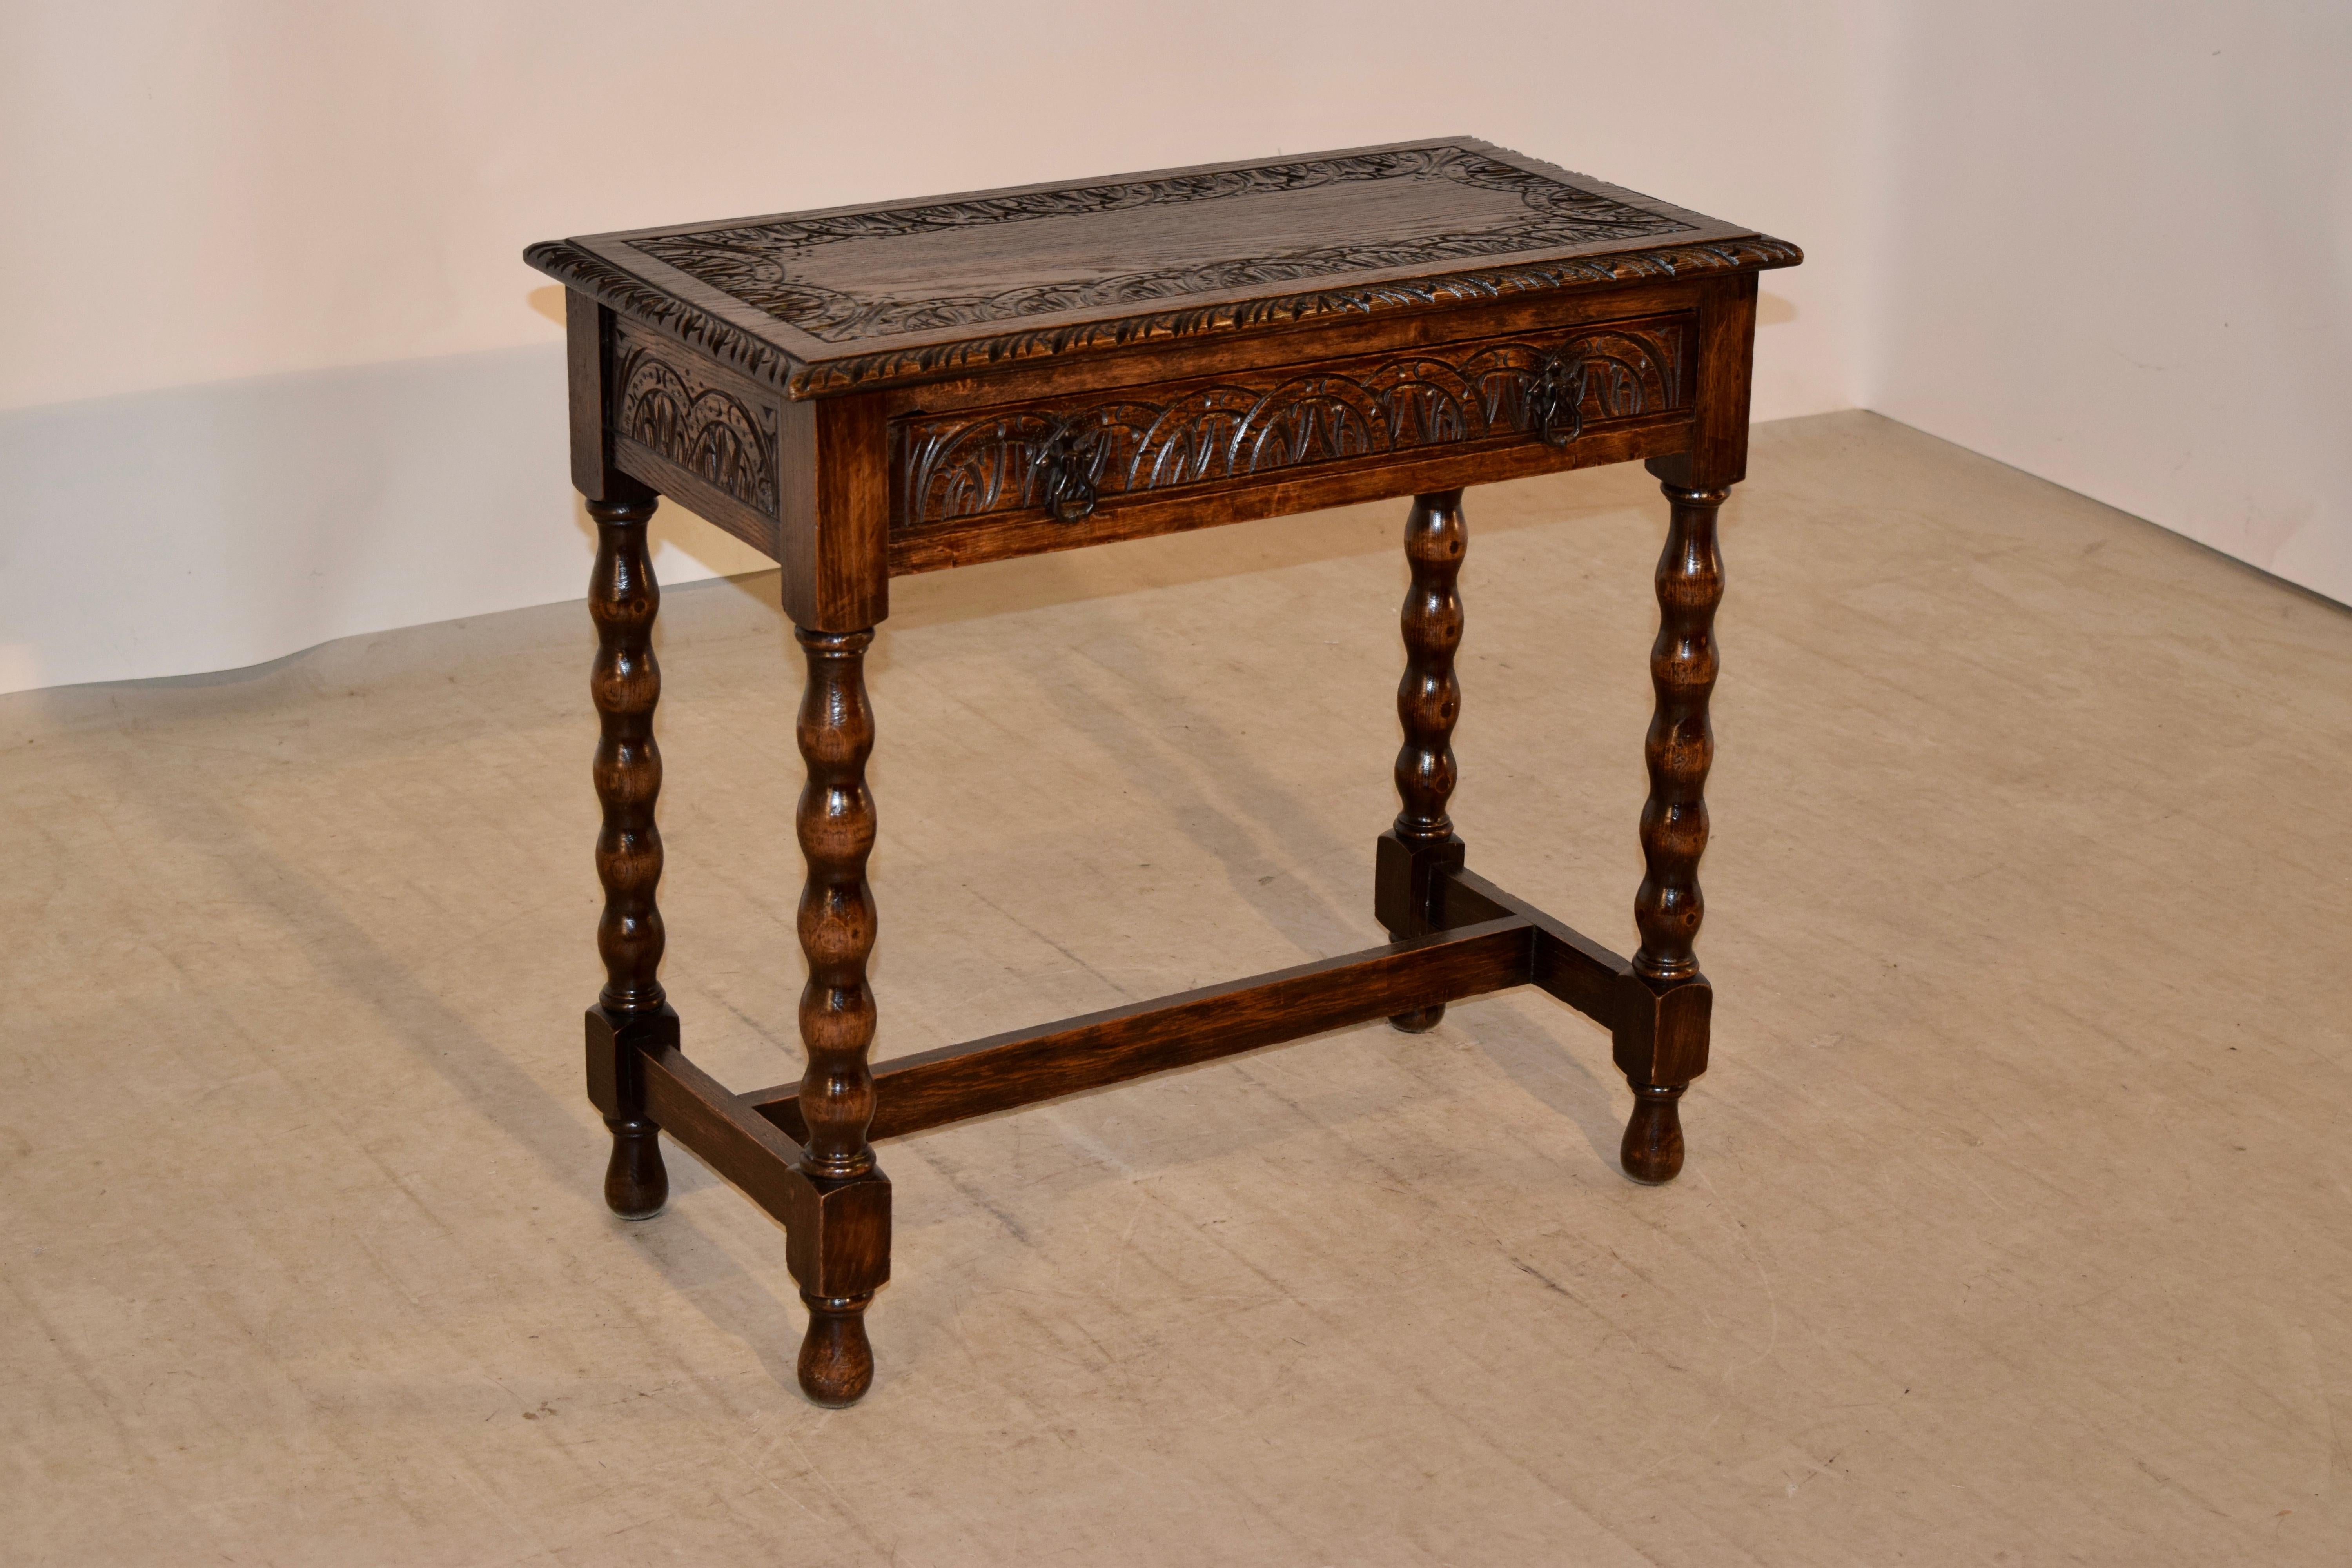 19th century English oak side table with a hand carved decorated border around the top with a bevelled and hand carved edge as well. This follows down to a hand carved apron on all four sides for easy placement in any room and contains a single